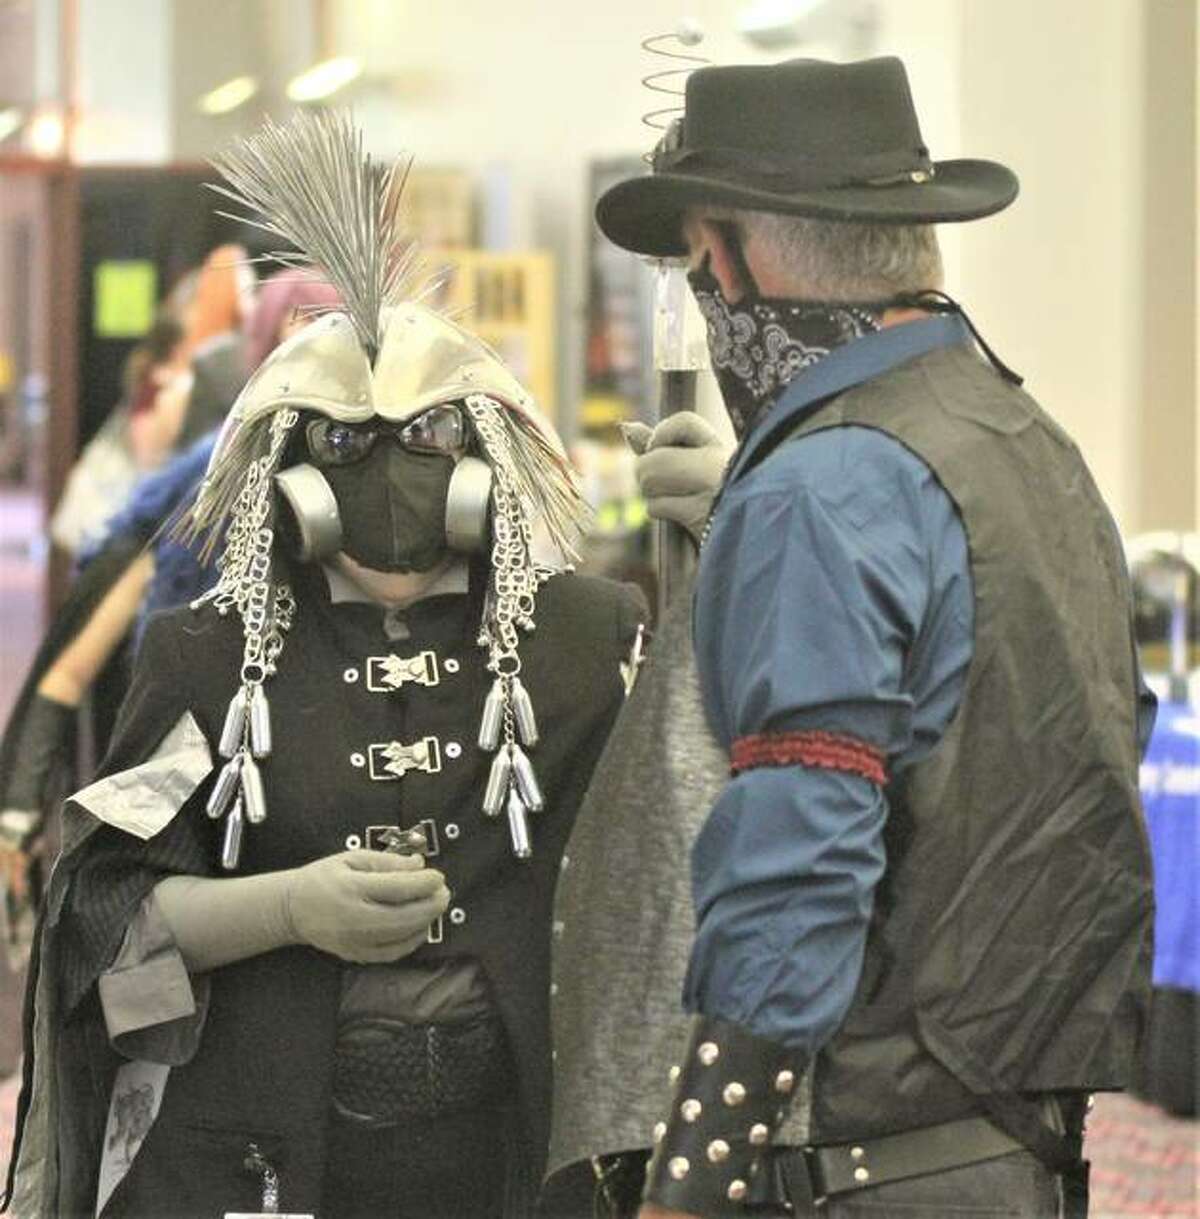 Snail Scott, left, a St. Louis-based sculptor wearing a costume she describes as “Post-Apocalyptic Plague Shaman,” talks with another participant at Archon, the region’s premier Sci-Fi/Fantasy convention, held Oct. 1-3 in Collinsville’s Gateway Convention Center. After missing last year because of COVID, the convention returned this year, although somewhat subdued and about half the normal attendance.